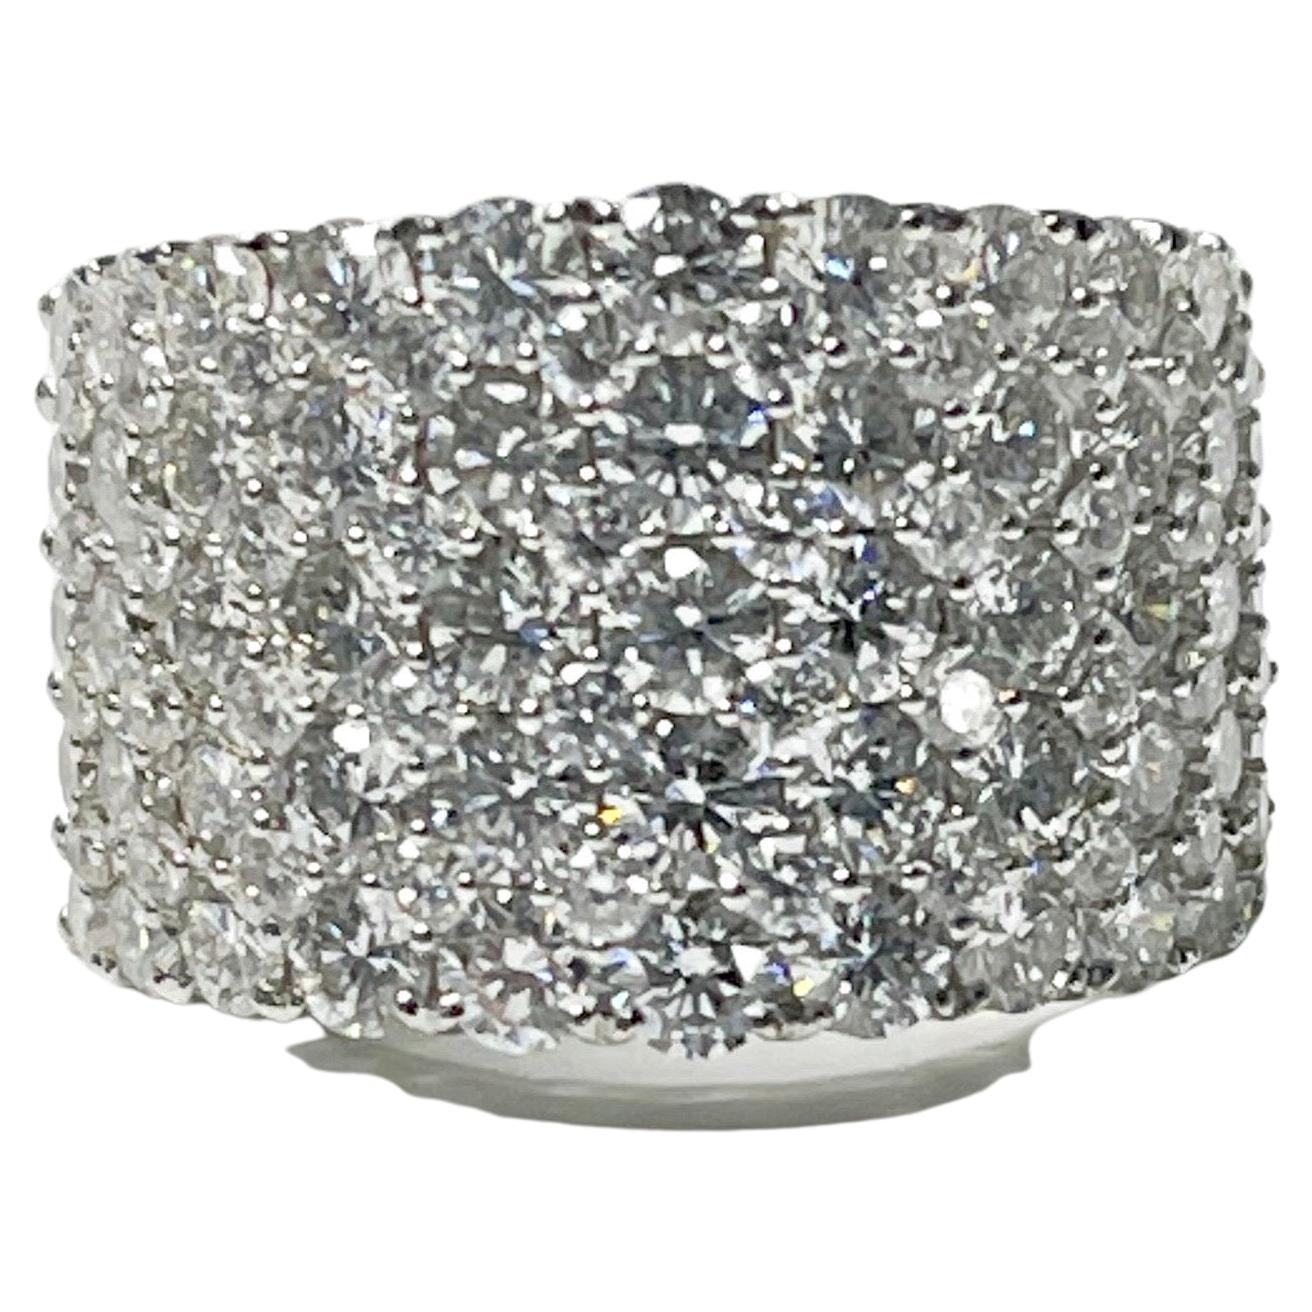 Contemporary 4.62 Carat White Diamond Pave Set Ring in 18K White Gold For Sale